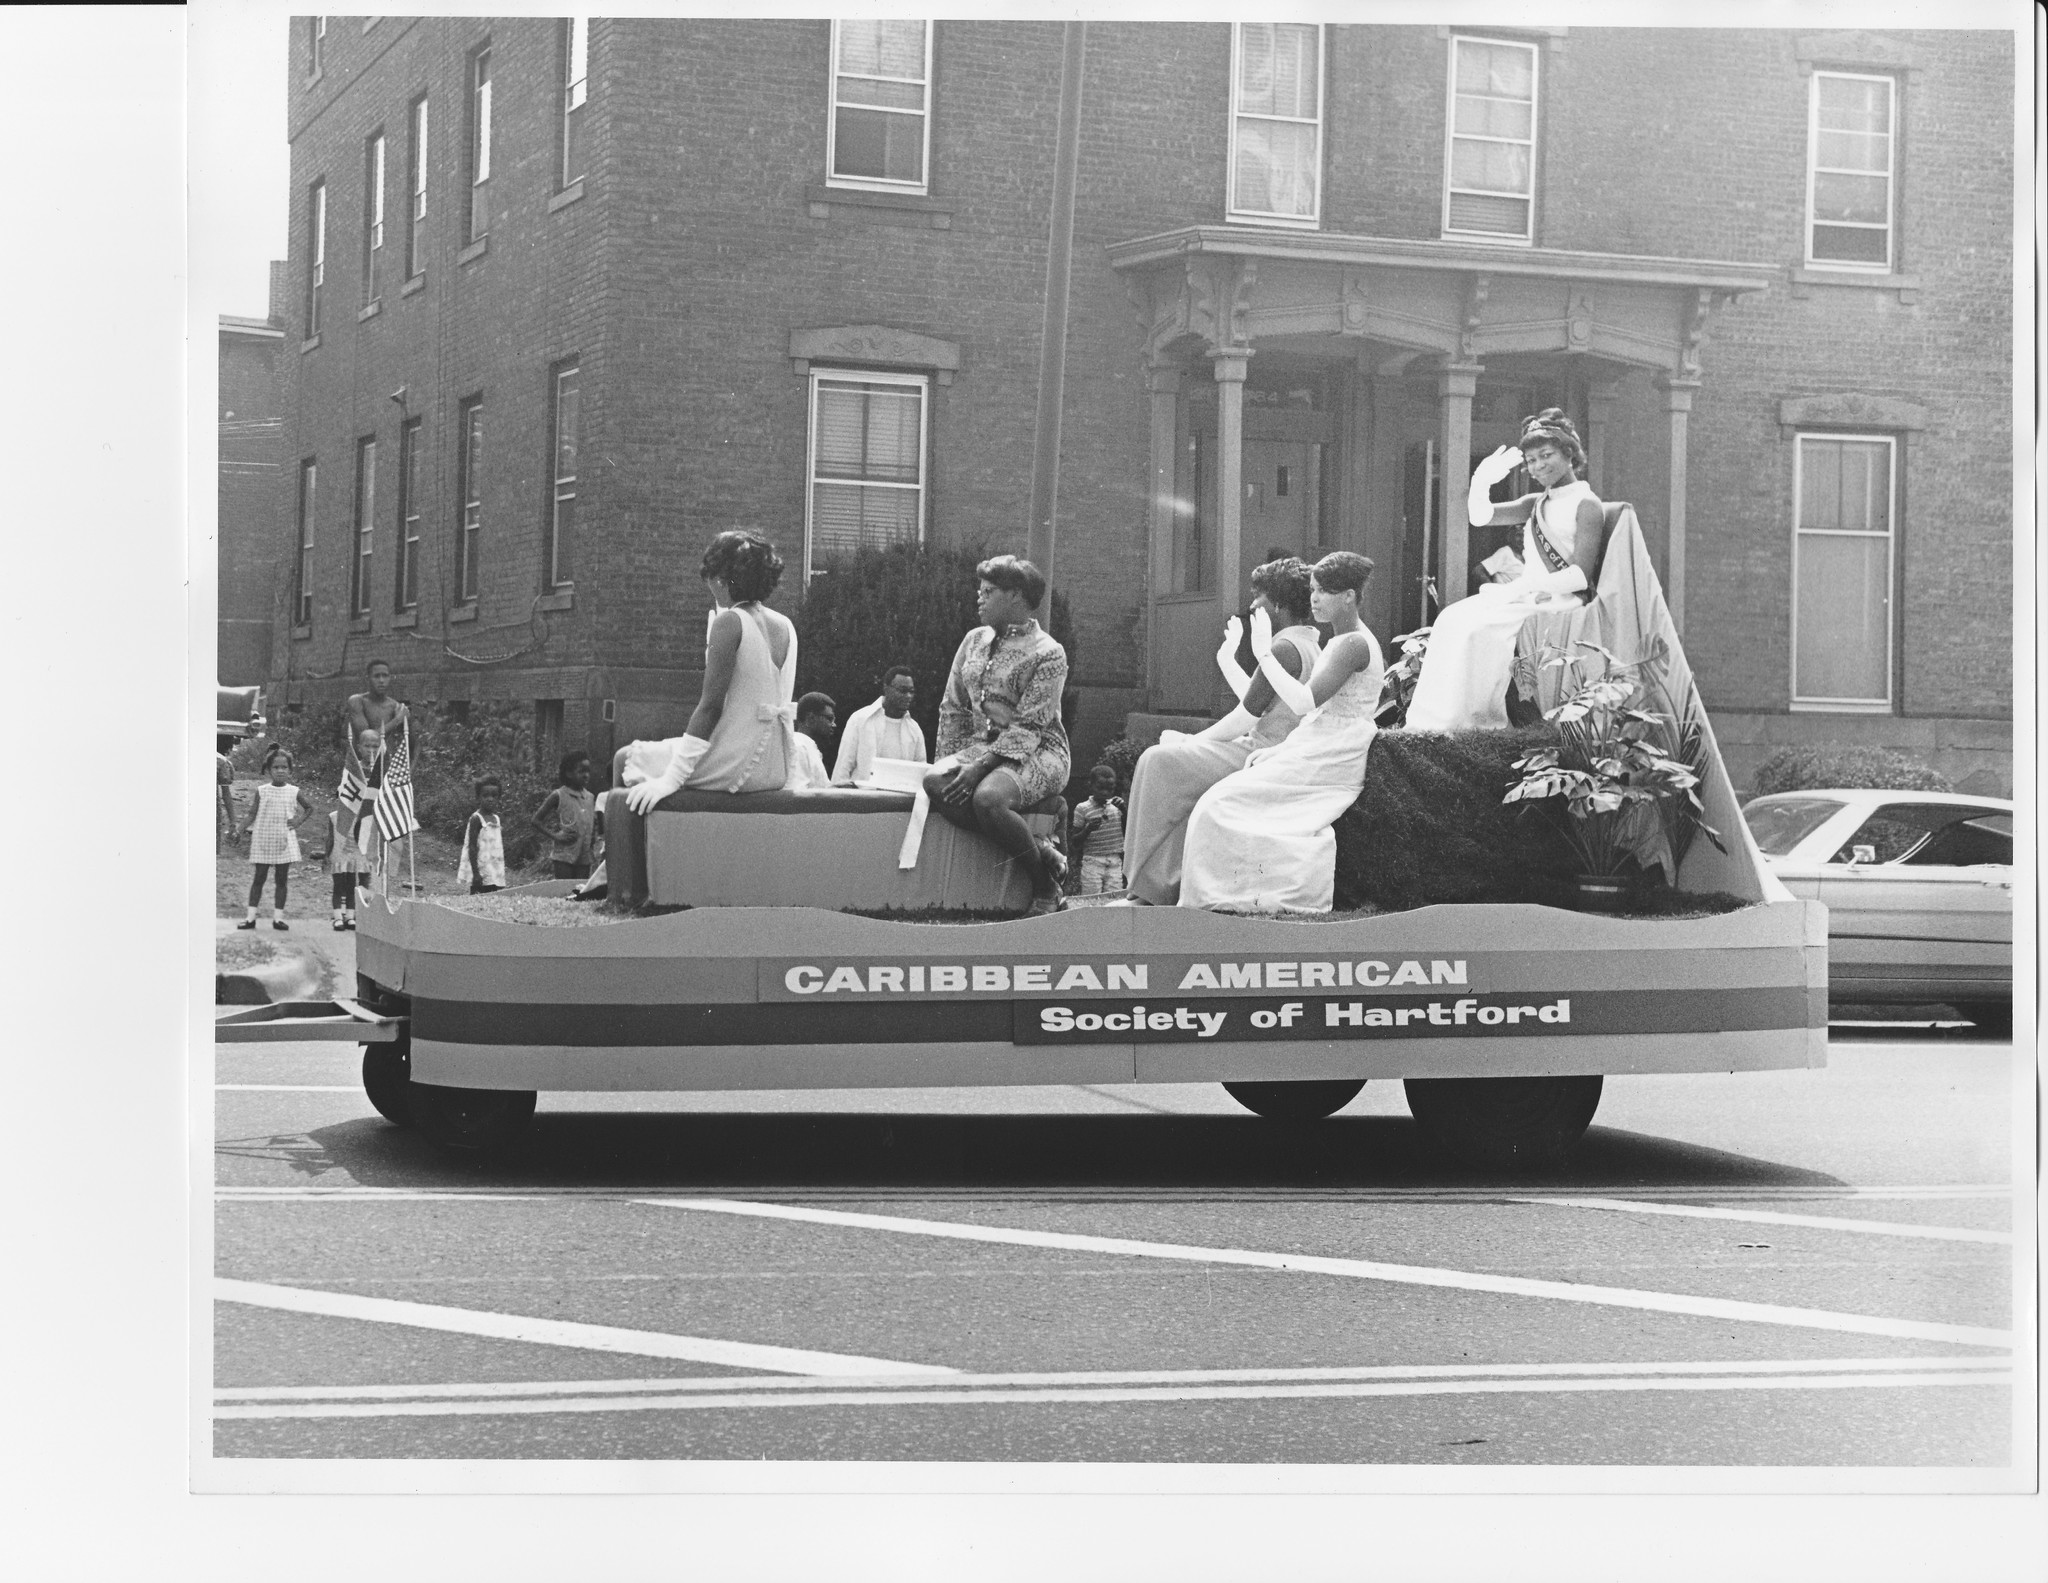 The Caribbean American Society float in the West Indian Parade